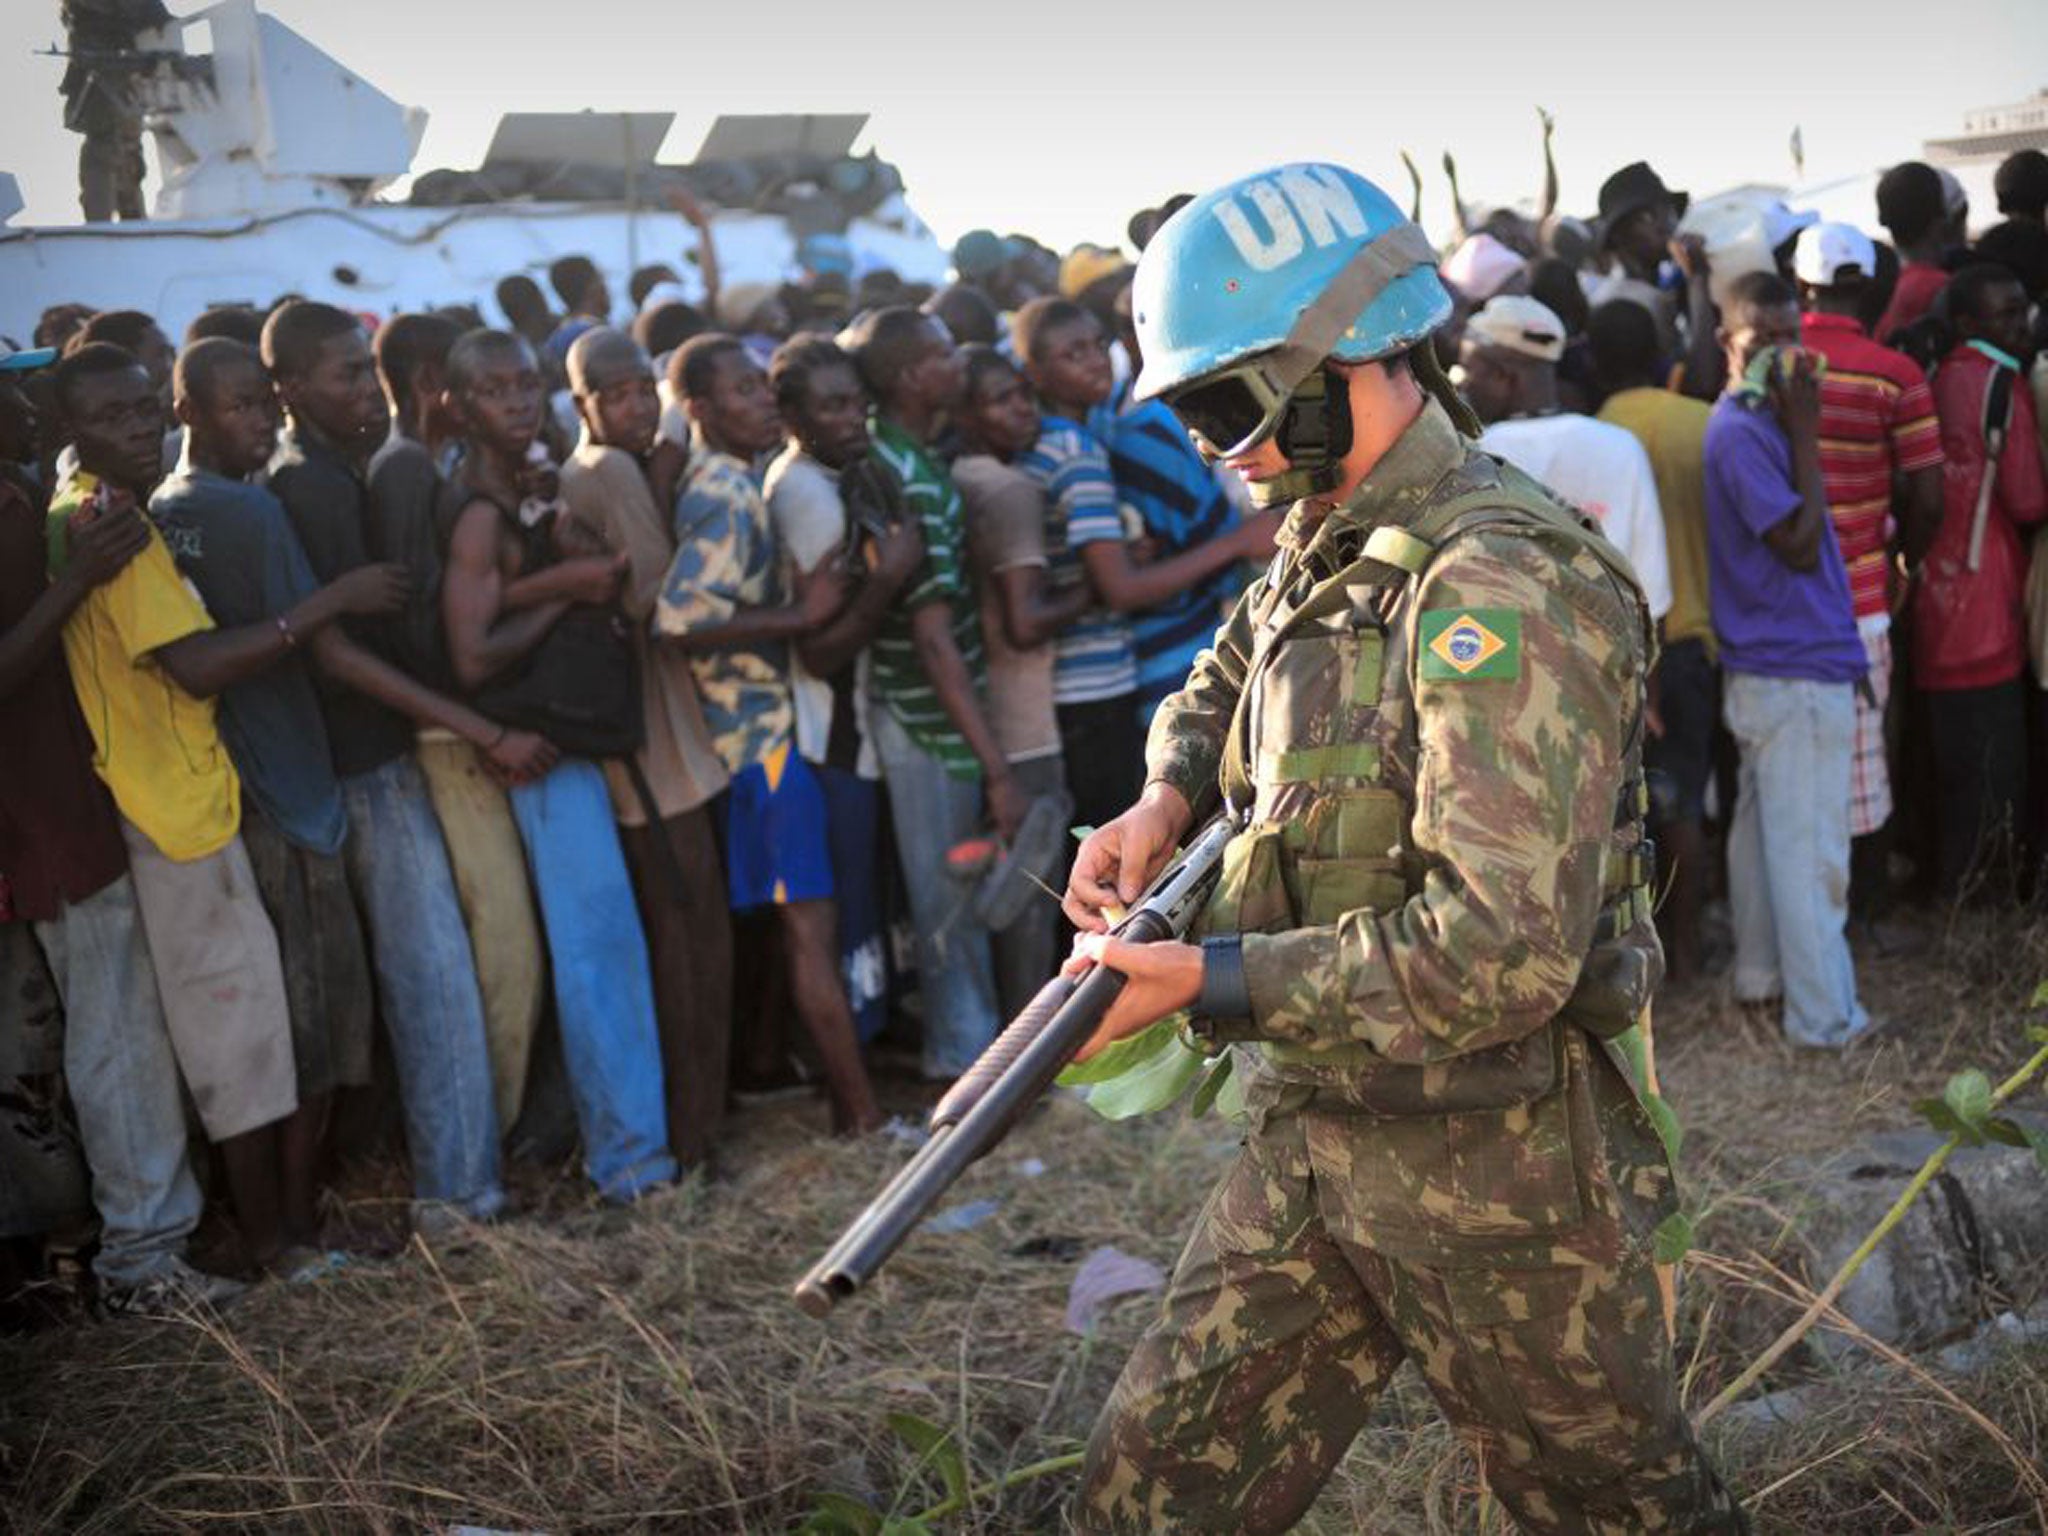 Nepalese peacekeepers who arrived in 2010 are widely believed to have brought the disease to Haiti